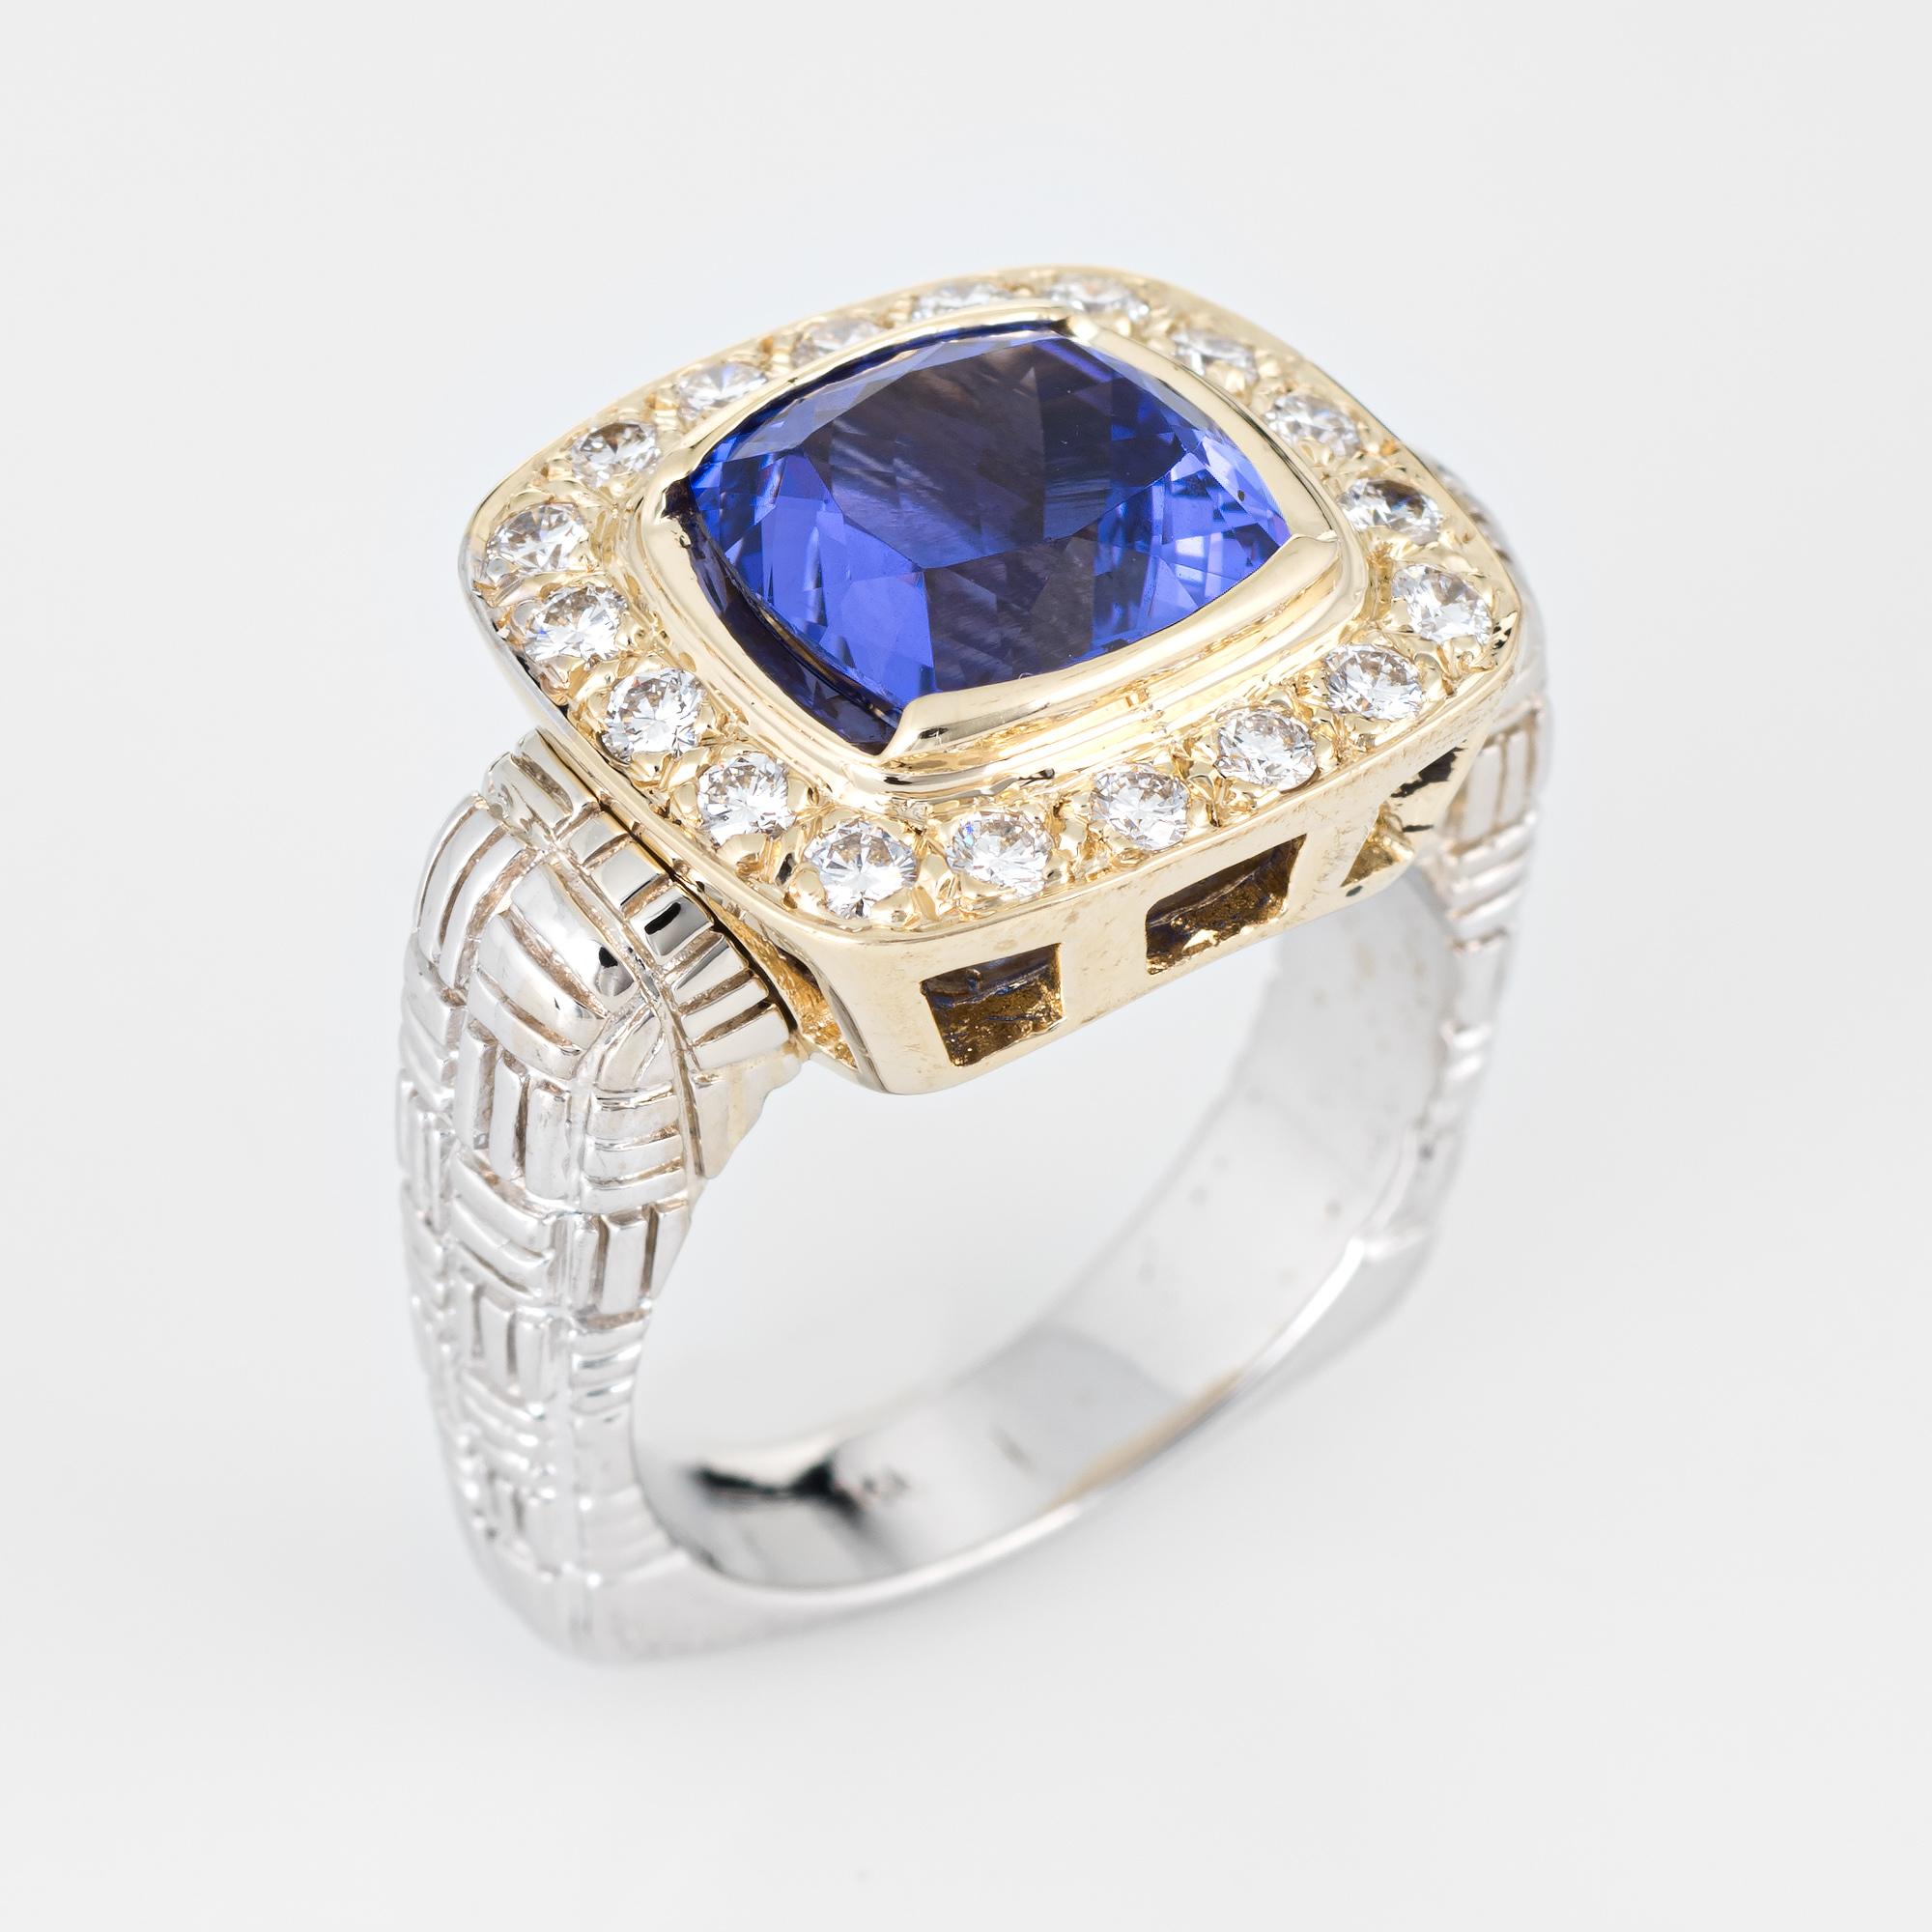 Finely detailed vintage tanzanite & diamond square cocktail ring (circa 1980s to 1990s) crafted in 14 karat yellow & white gold. 

Cushion cut faceted tanzanite measures 10mm x 8mm (estimated at 3.50 carats), accented with 18 estimated 0.04 carat